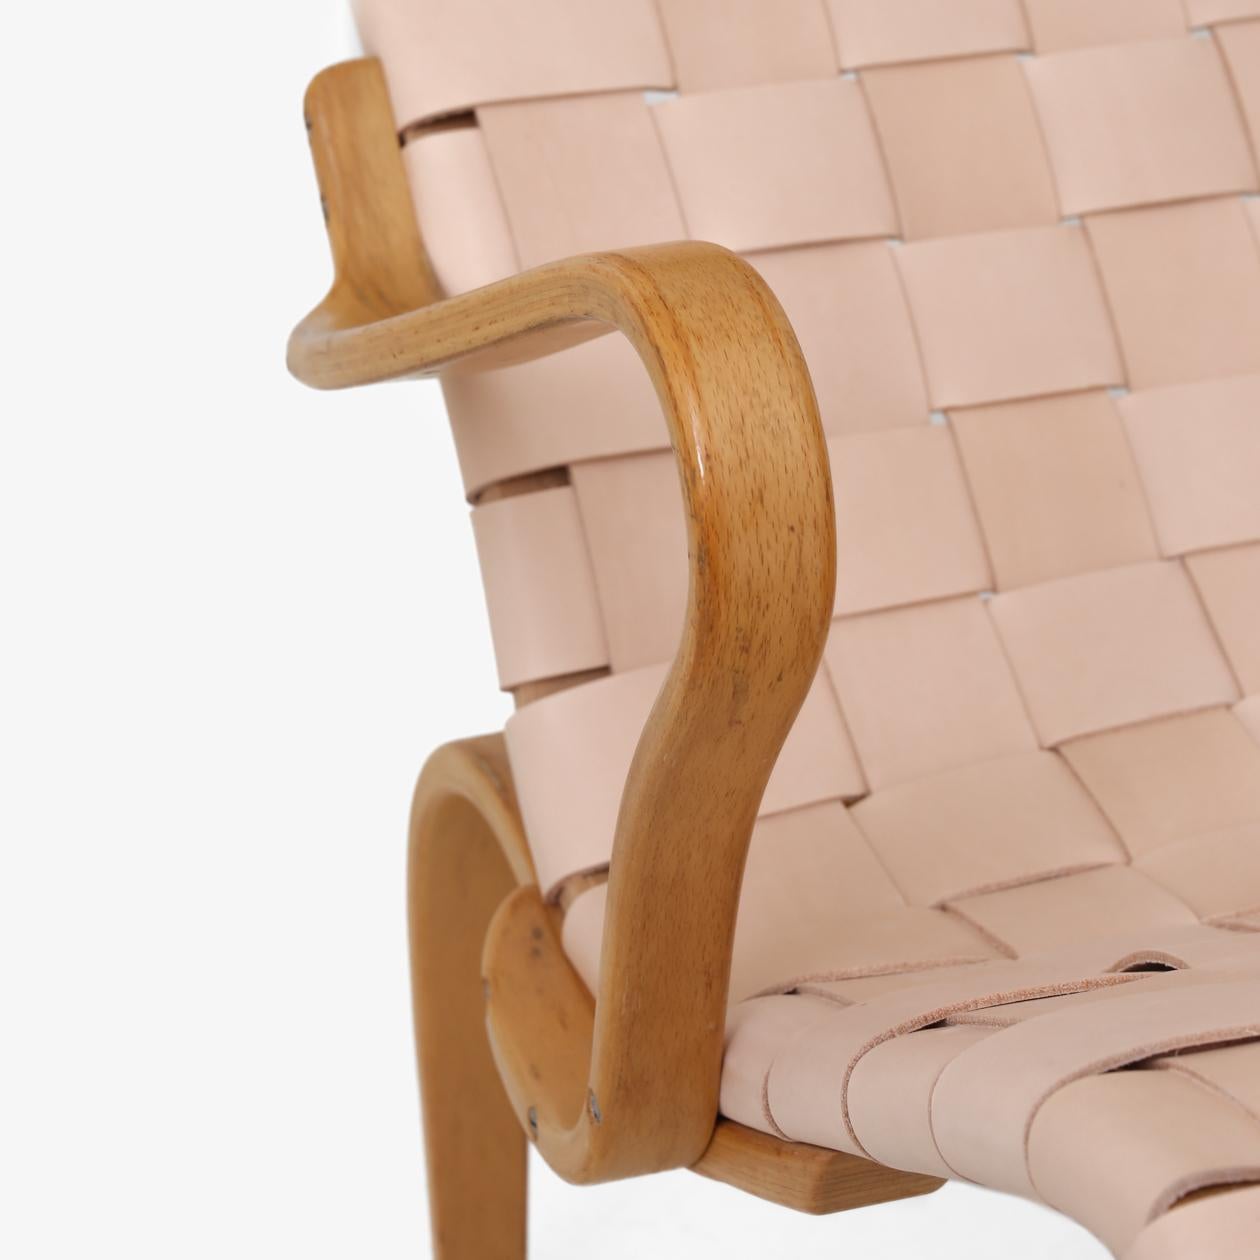 Pernilla 2 - Armchair in core leather and cushion in washed canvas. Frame in beech. Bruno Mathsson / Dux